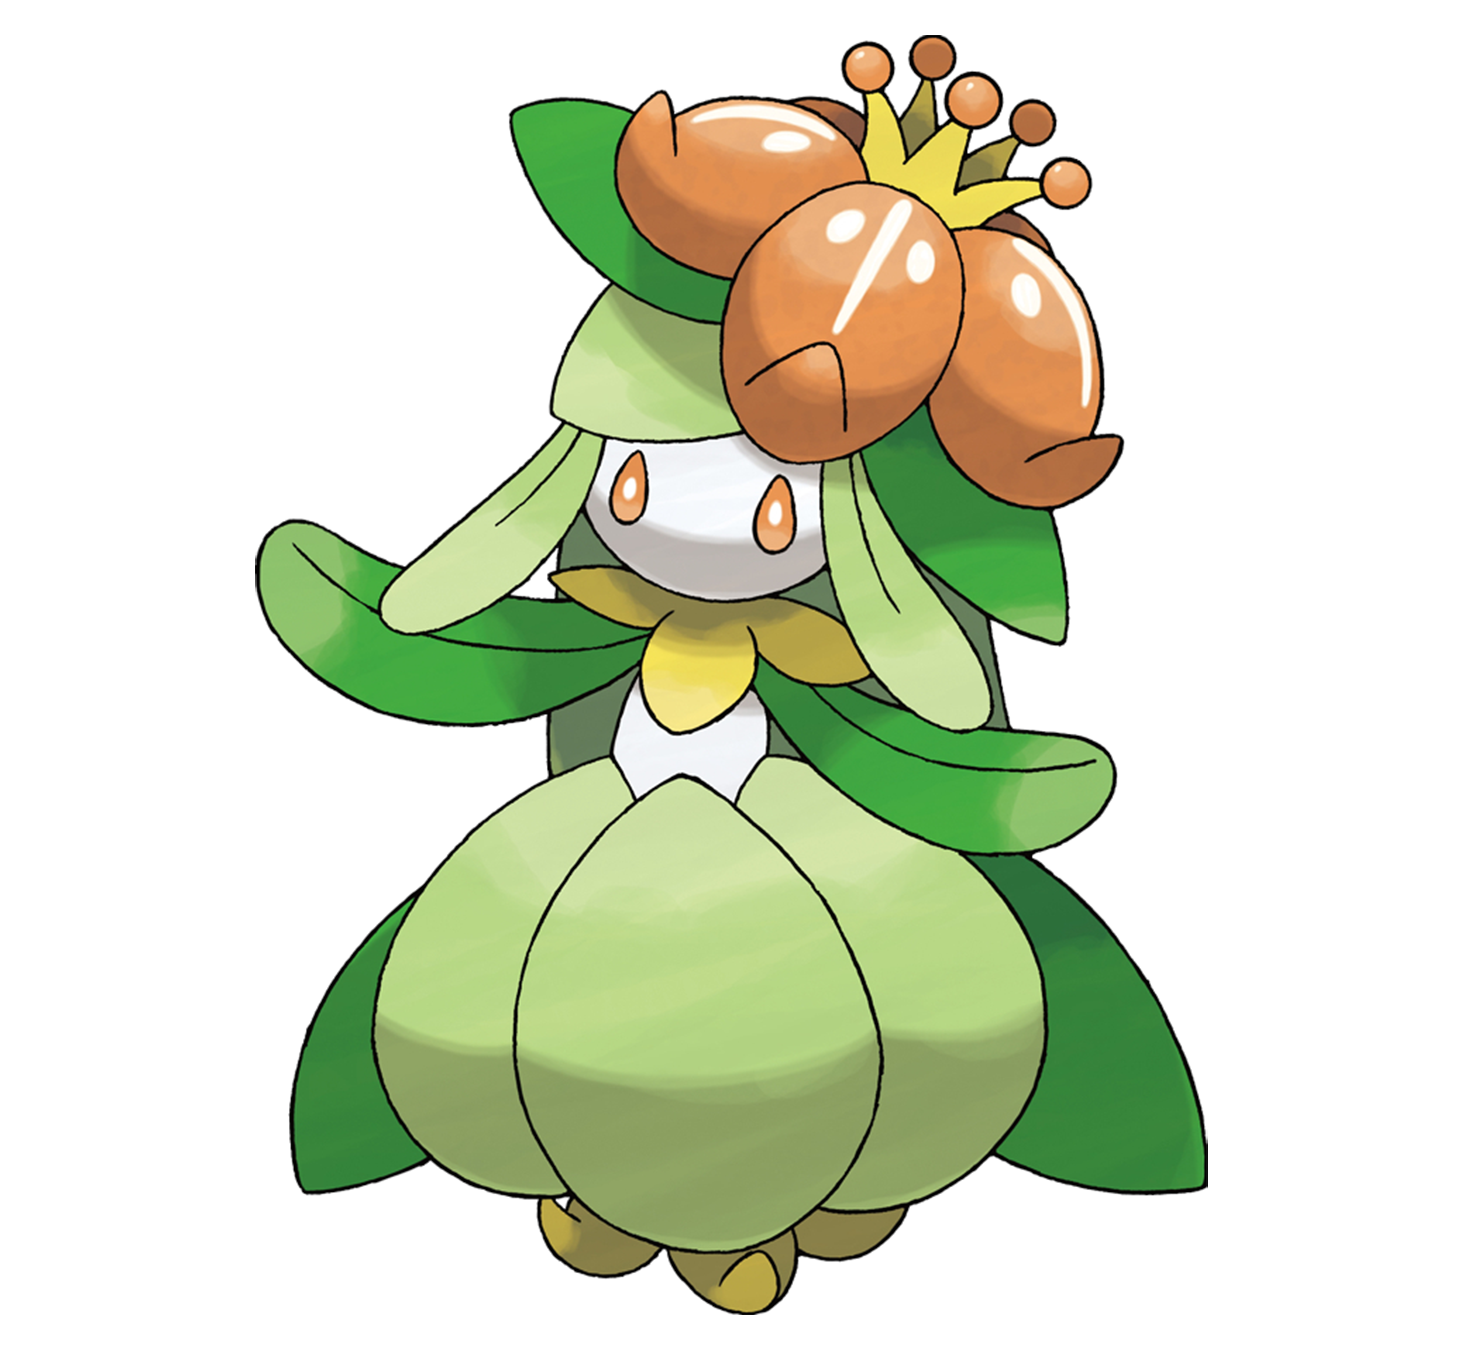 http://img1.wikia.nocookie.net/__cb20101228210219/es.pokemon/images/f/f5/Lilligant.png